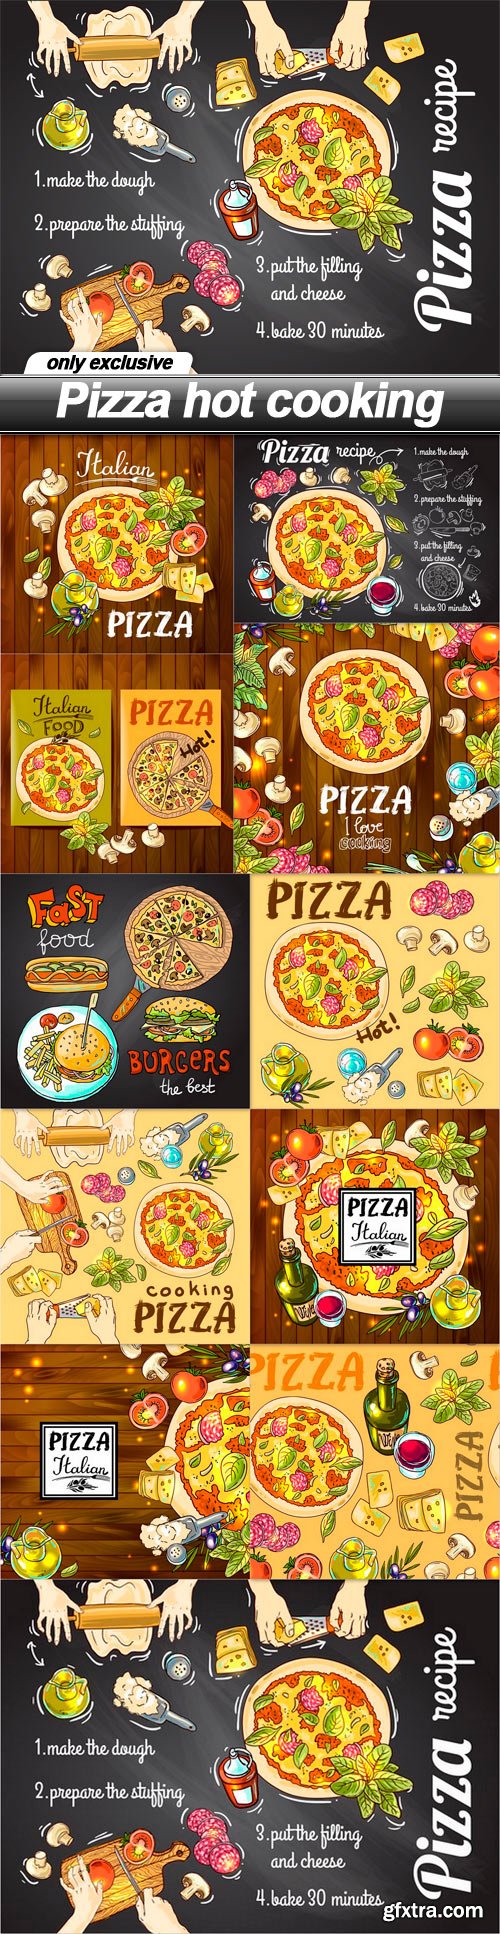 Pizza hot cooking - 11 EPS